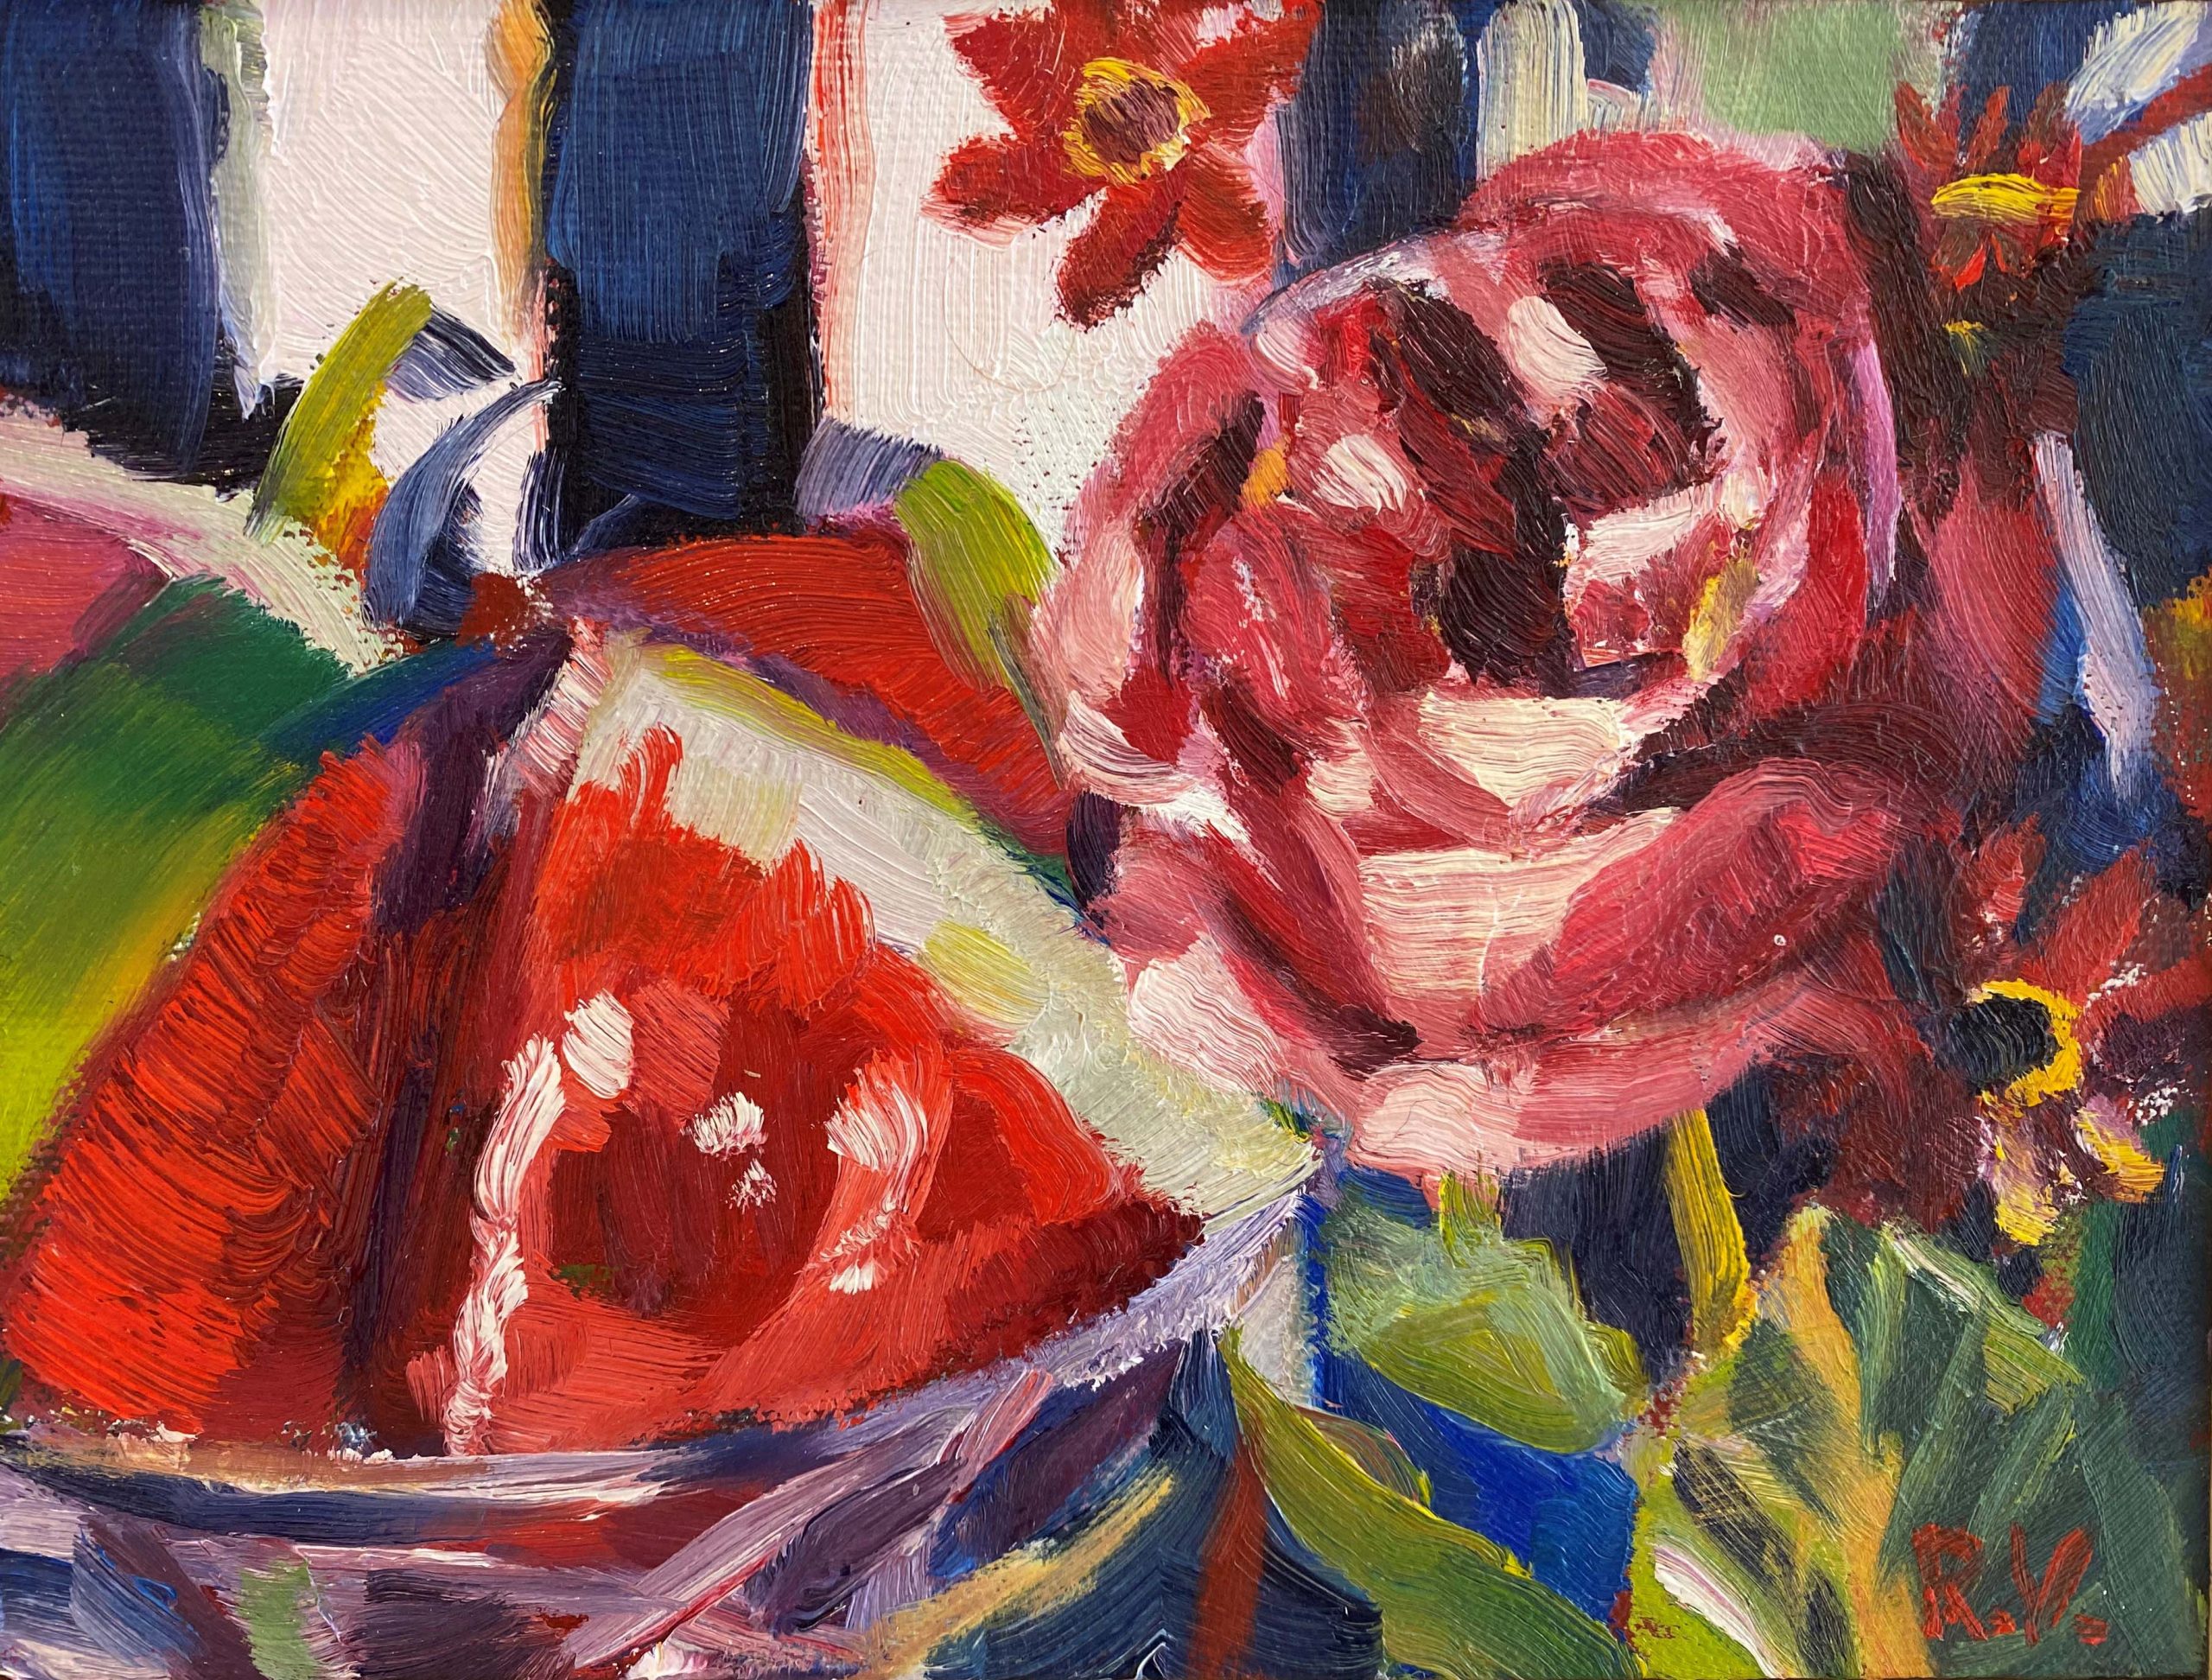 Rosemary Valadon 'Watermelon and Rose' oil on board 16 x 21cm